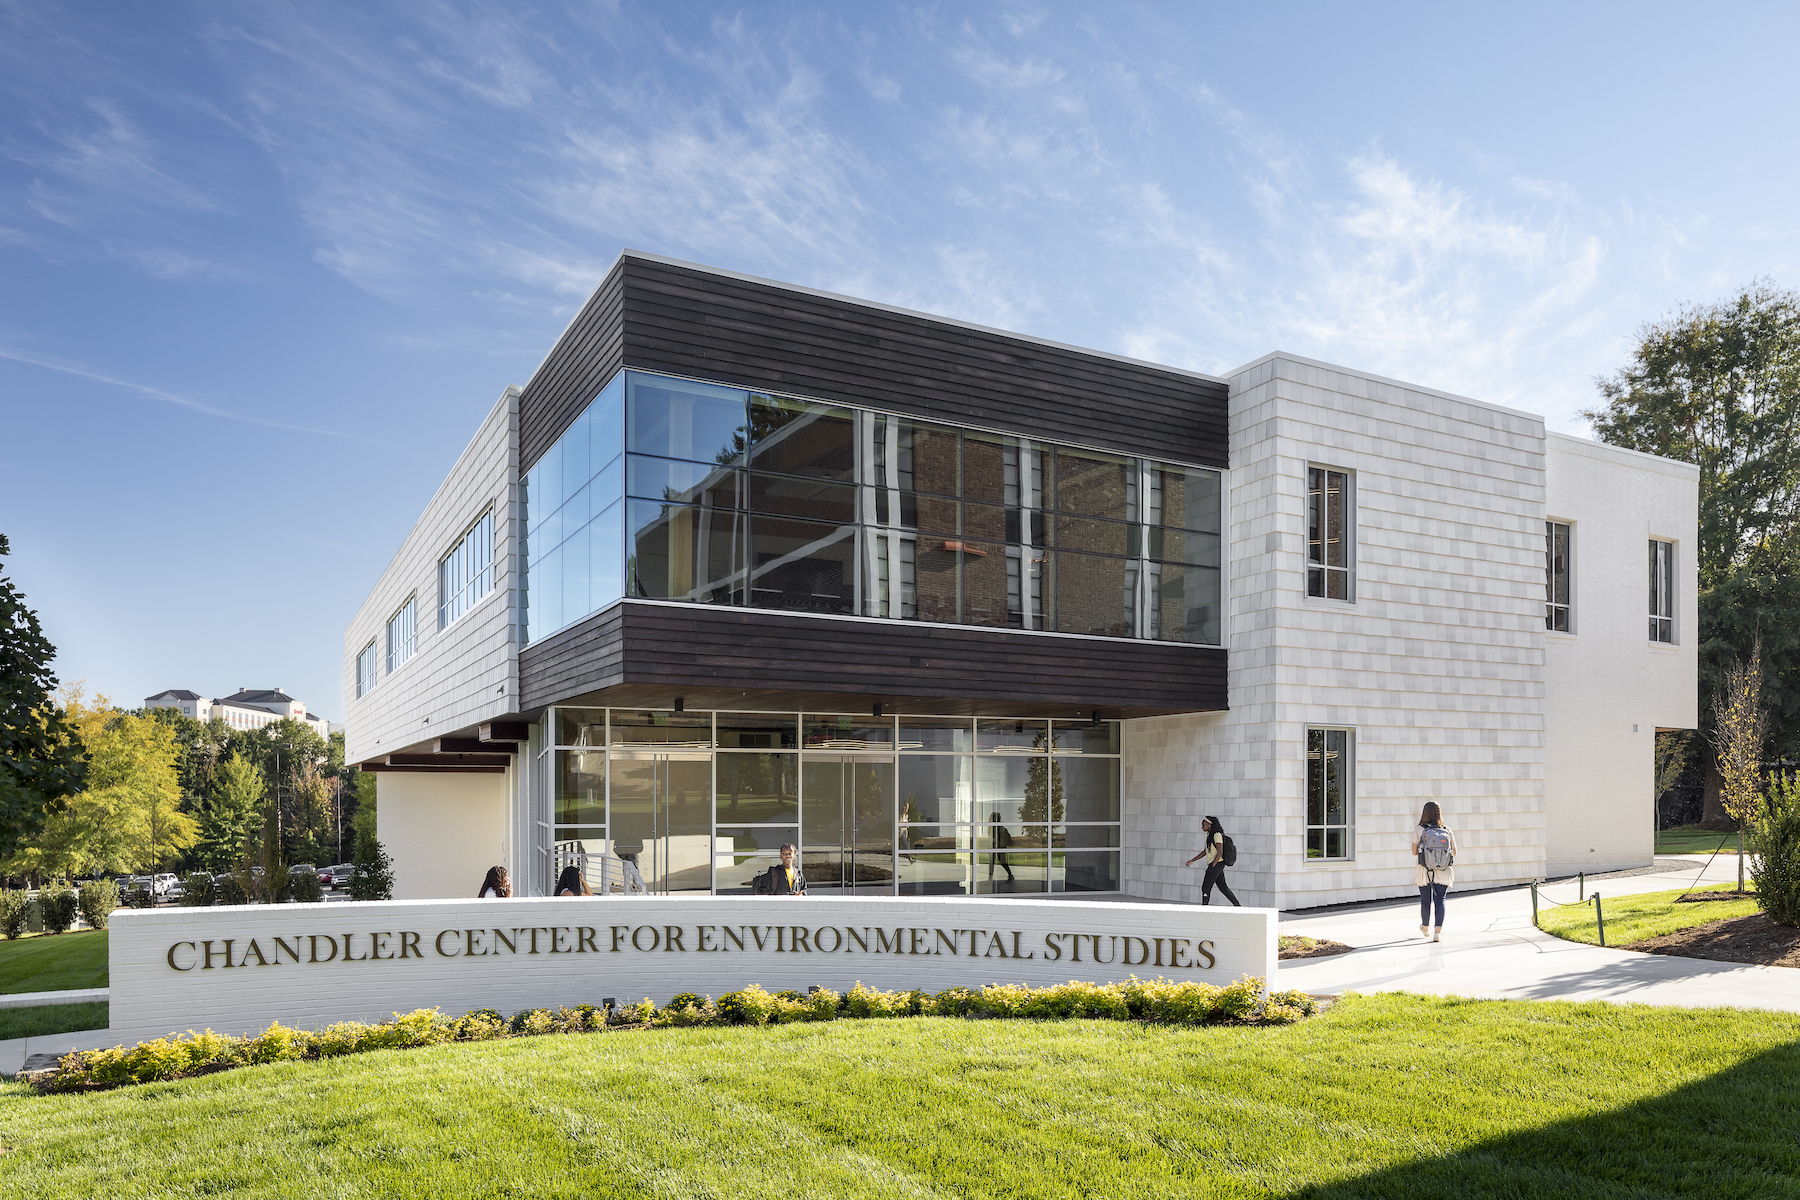 Wofford College's Chandler Center for Environmental Studies is positioned near and athletic arena and arts center on campus.